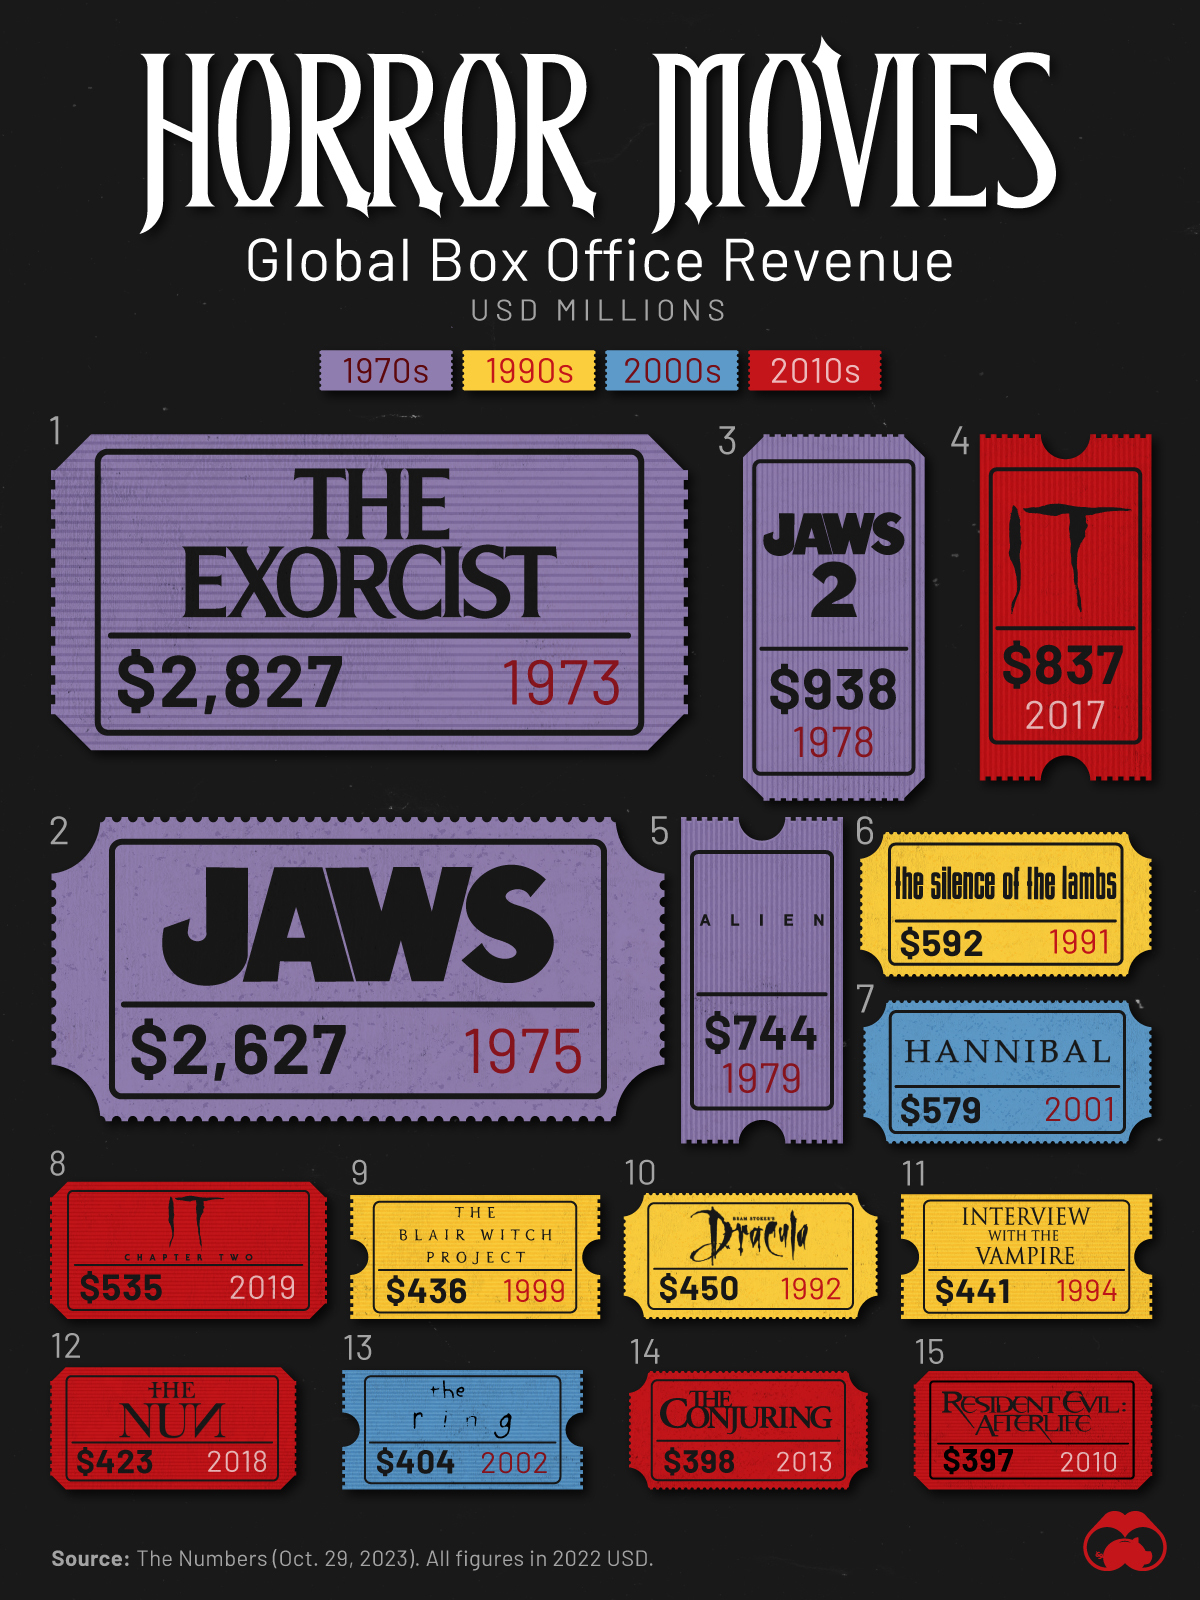 highest-grossing horror movies